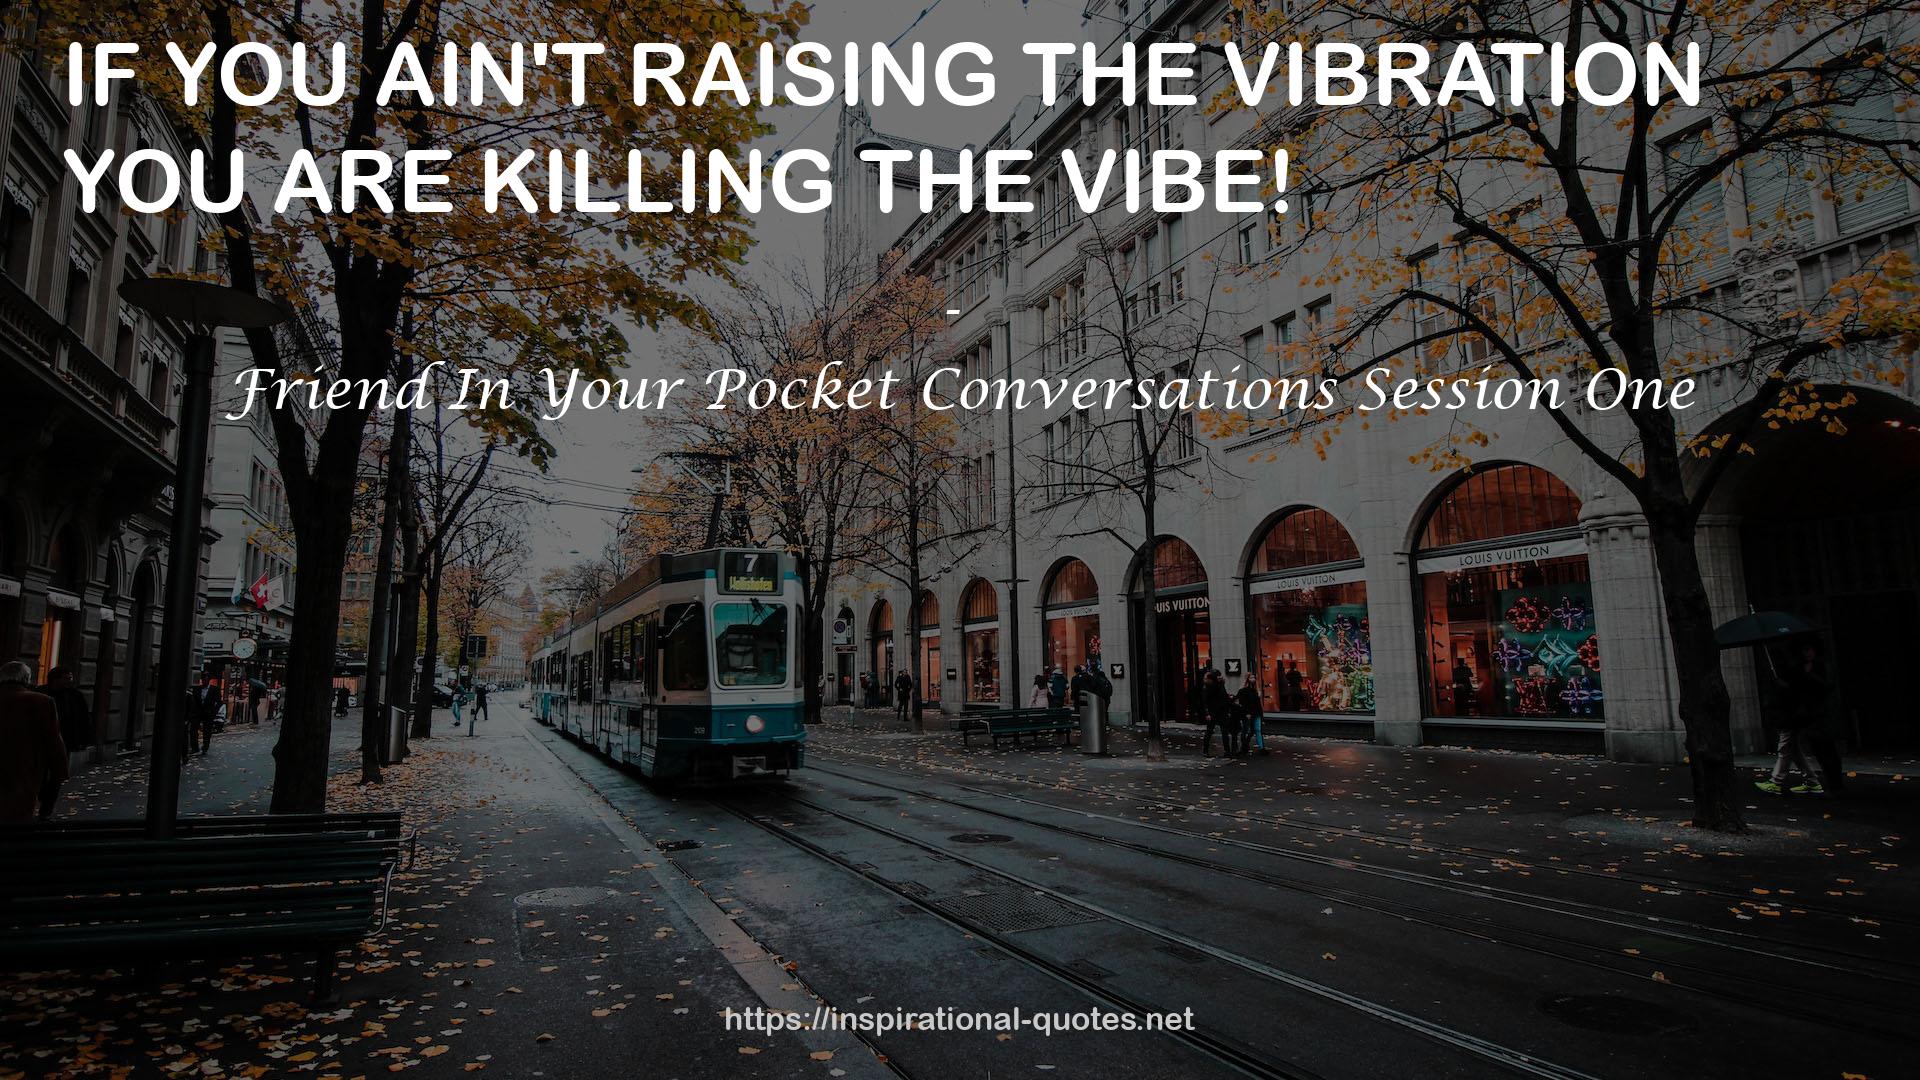 THE VIBRATION  QUOTES